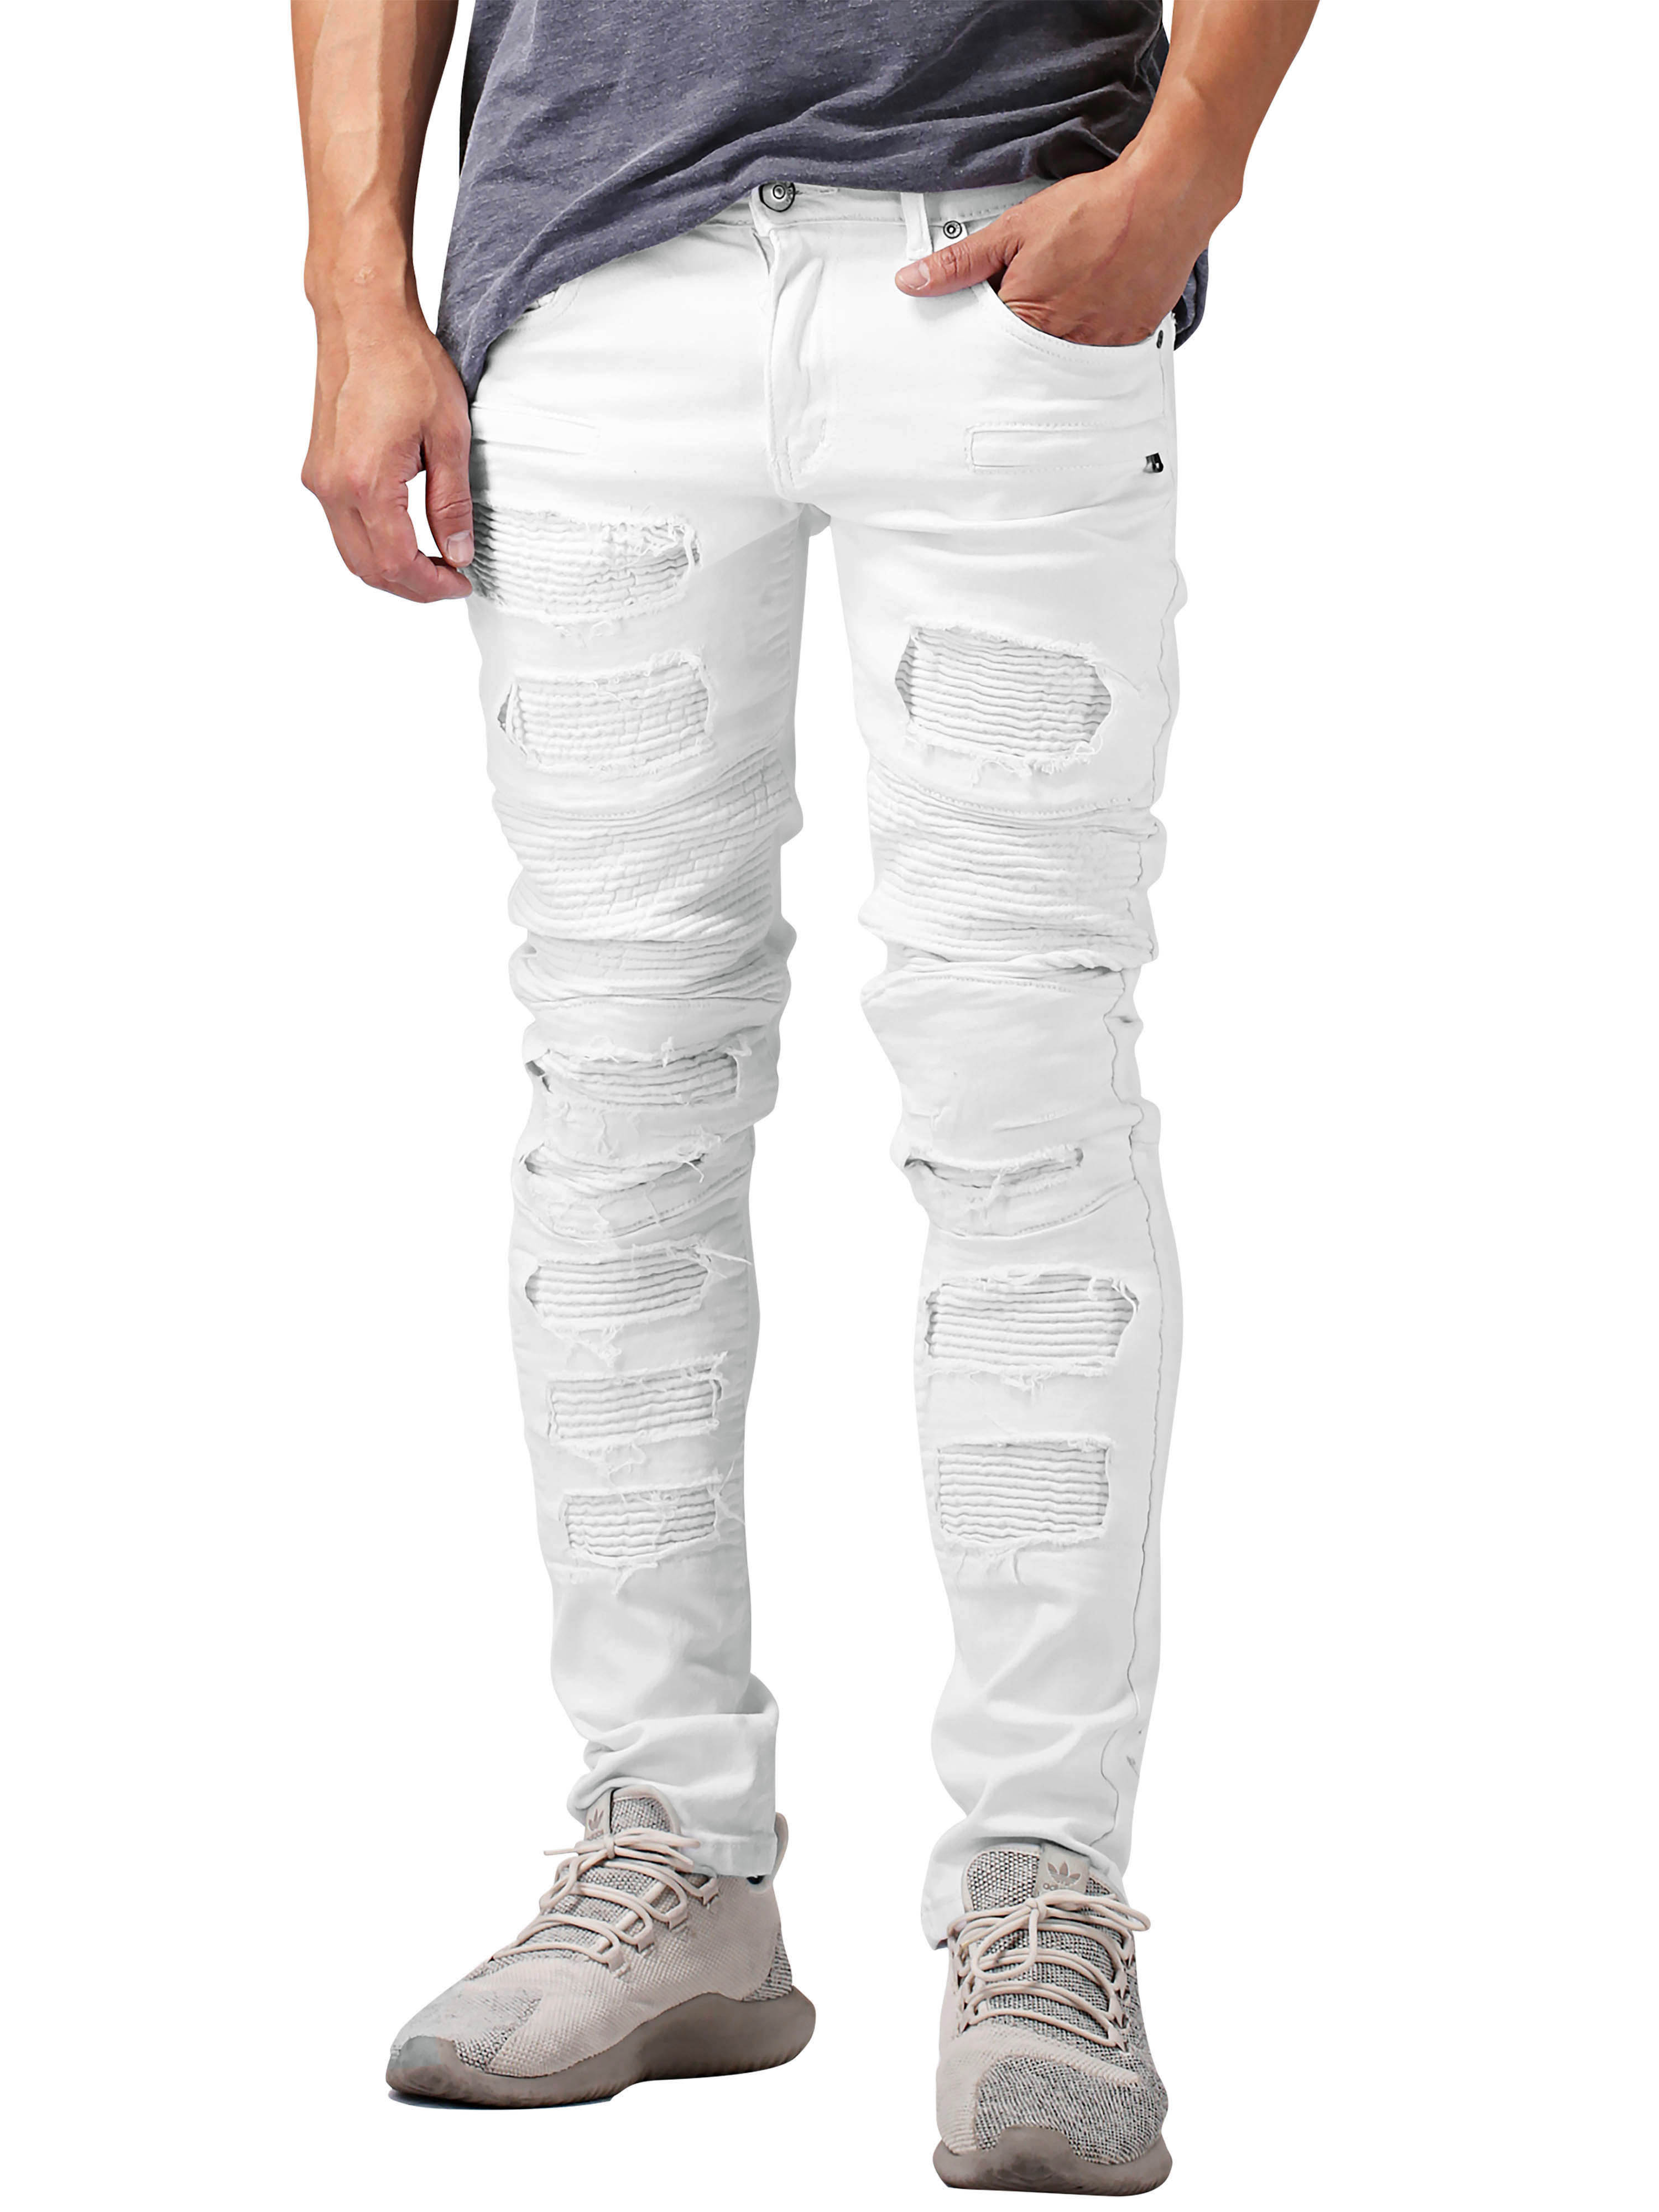 Ma Croix Mens Distressed Skinny Fit Denim Jeans with Zipper Pocket - image 1 of 6